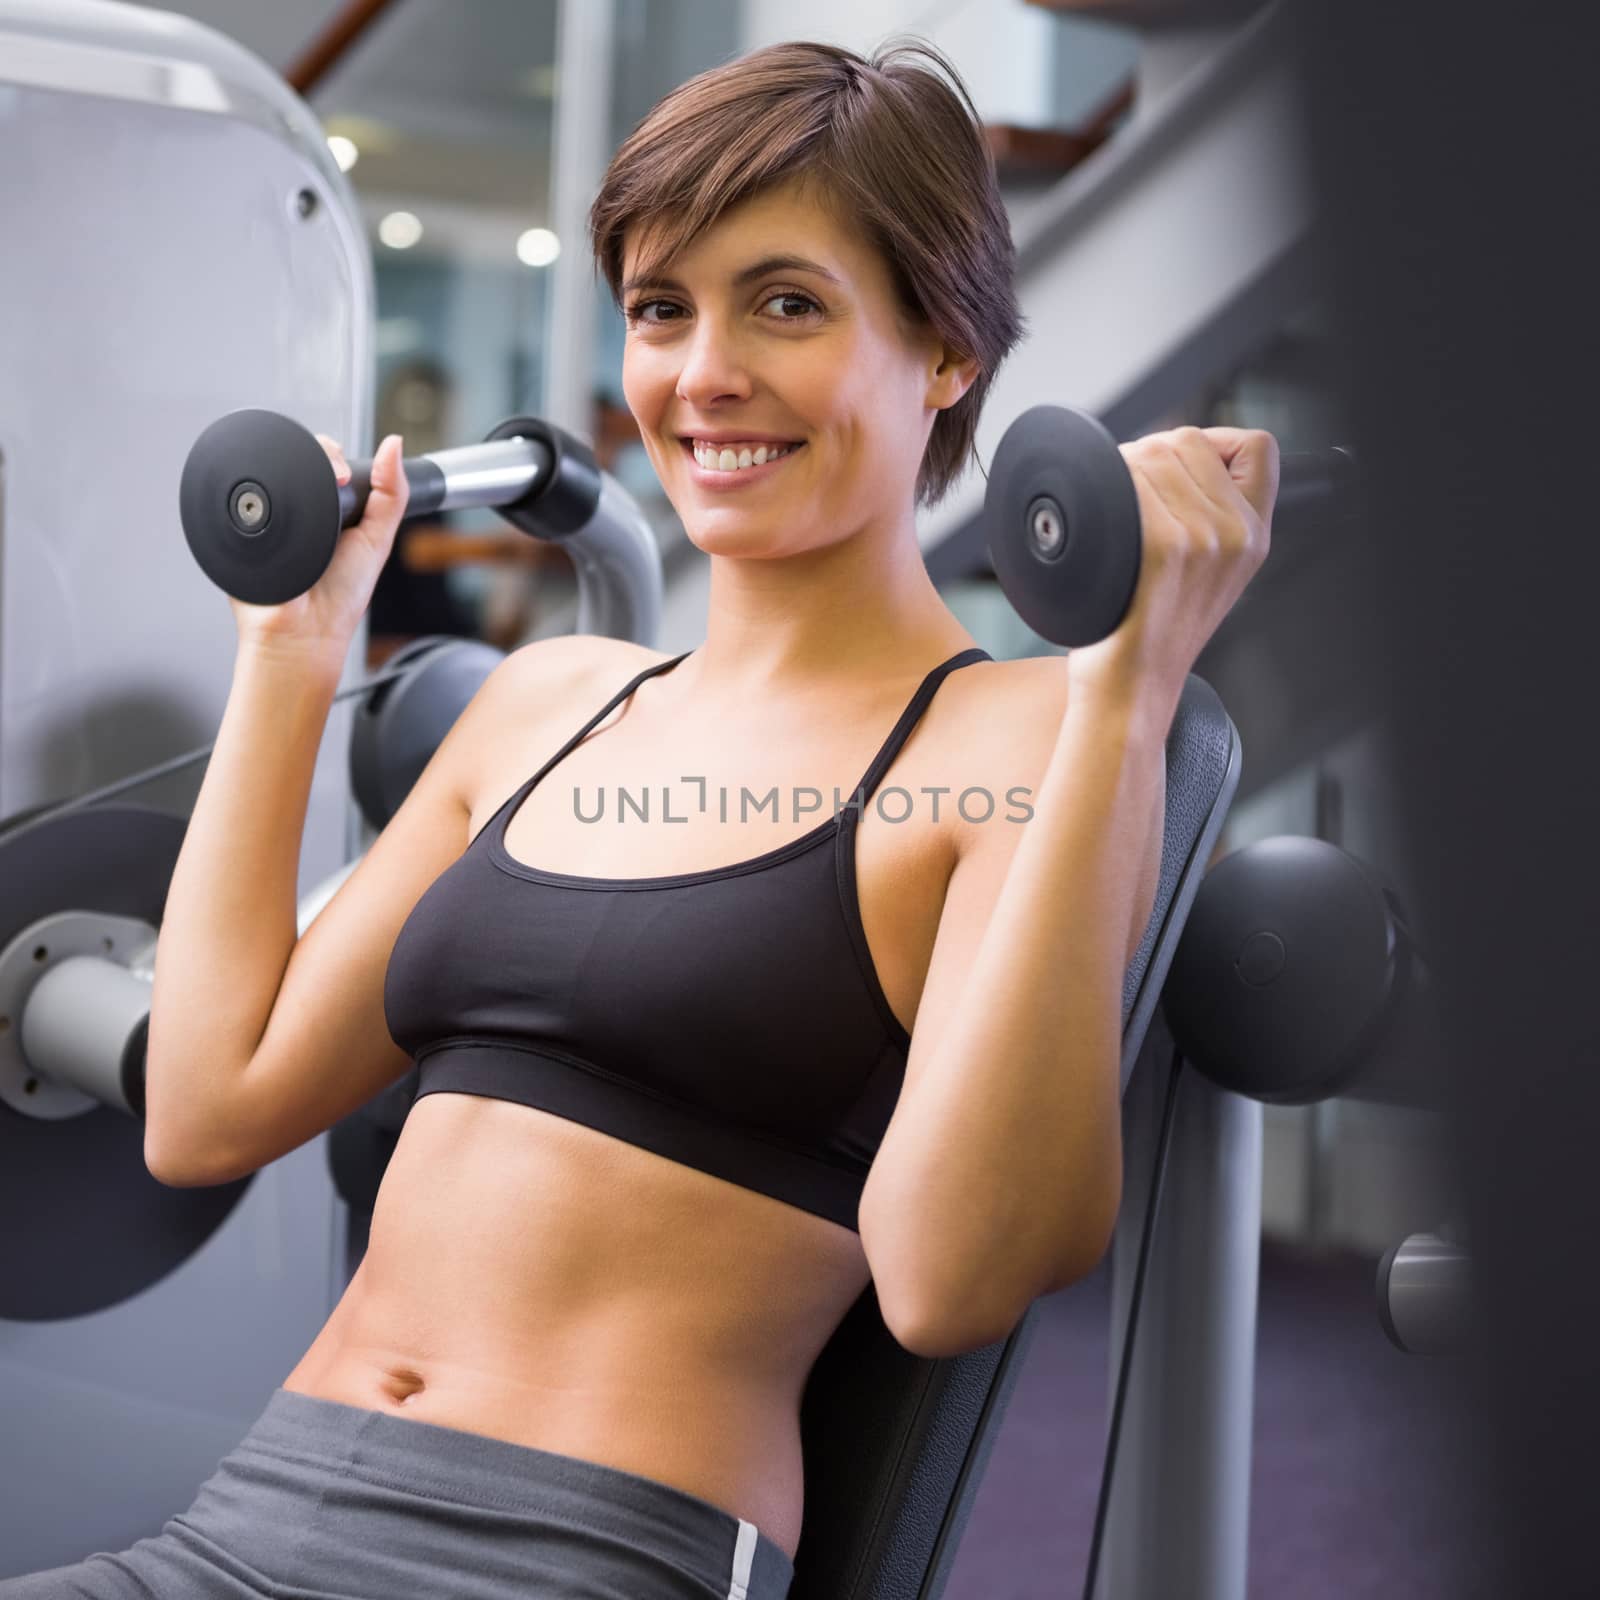 Smiling brunette using weights machine for arms at the gym